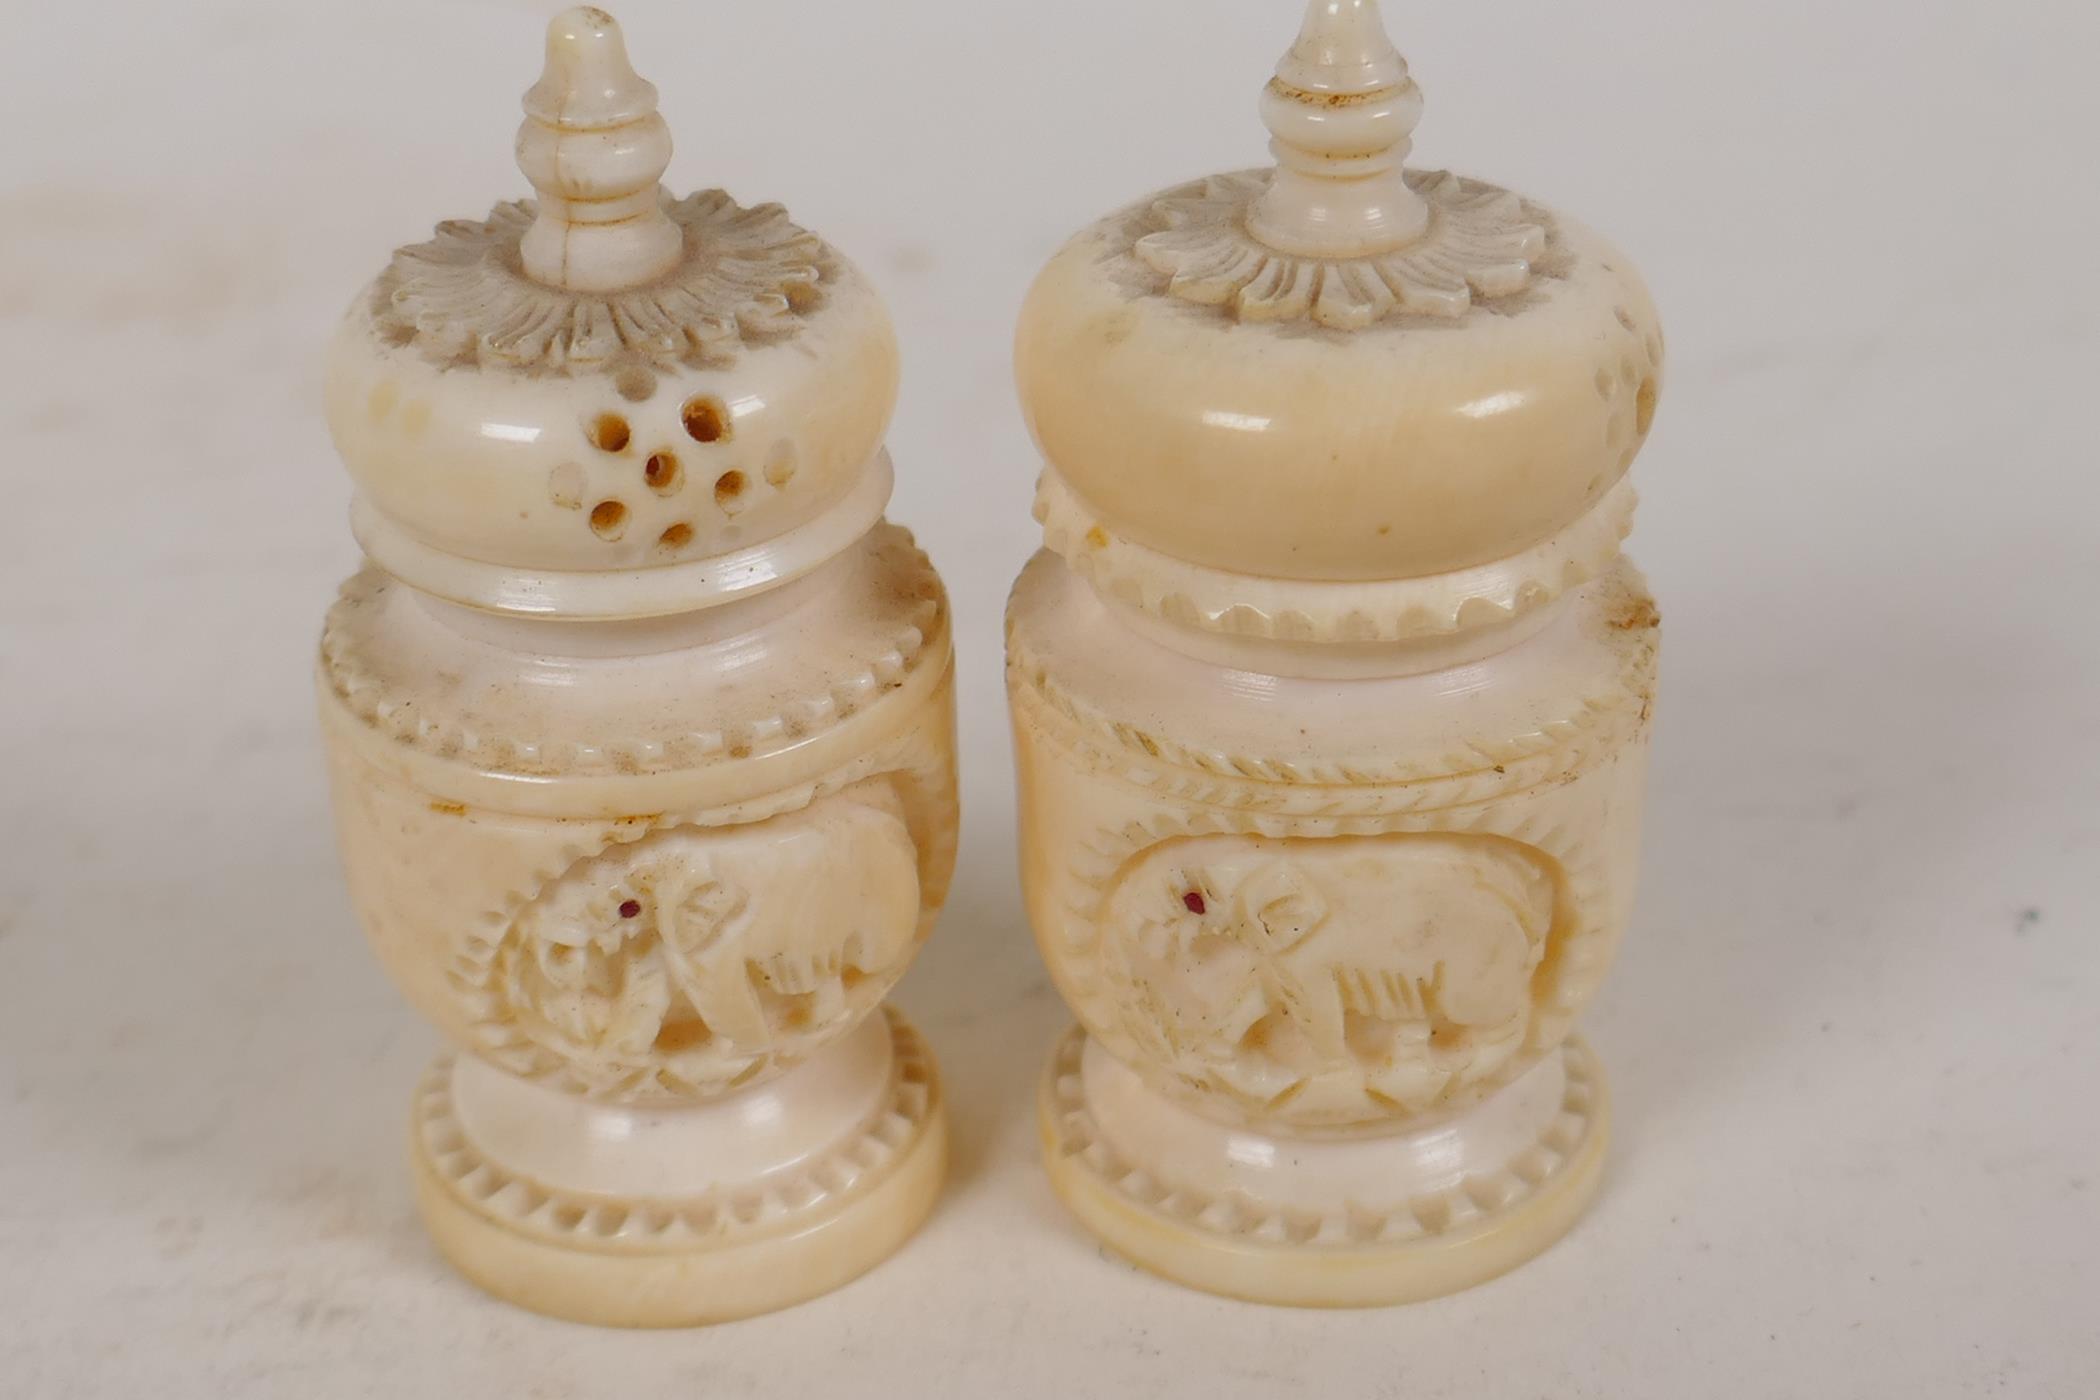 An Indian ivory cruet carved as temple towers, 2" high, and a similar smaller cruet - Image 2 of 4